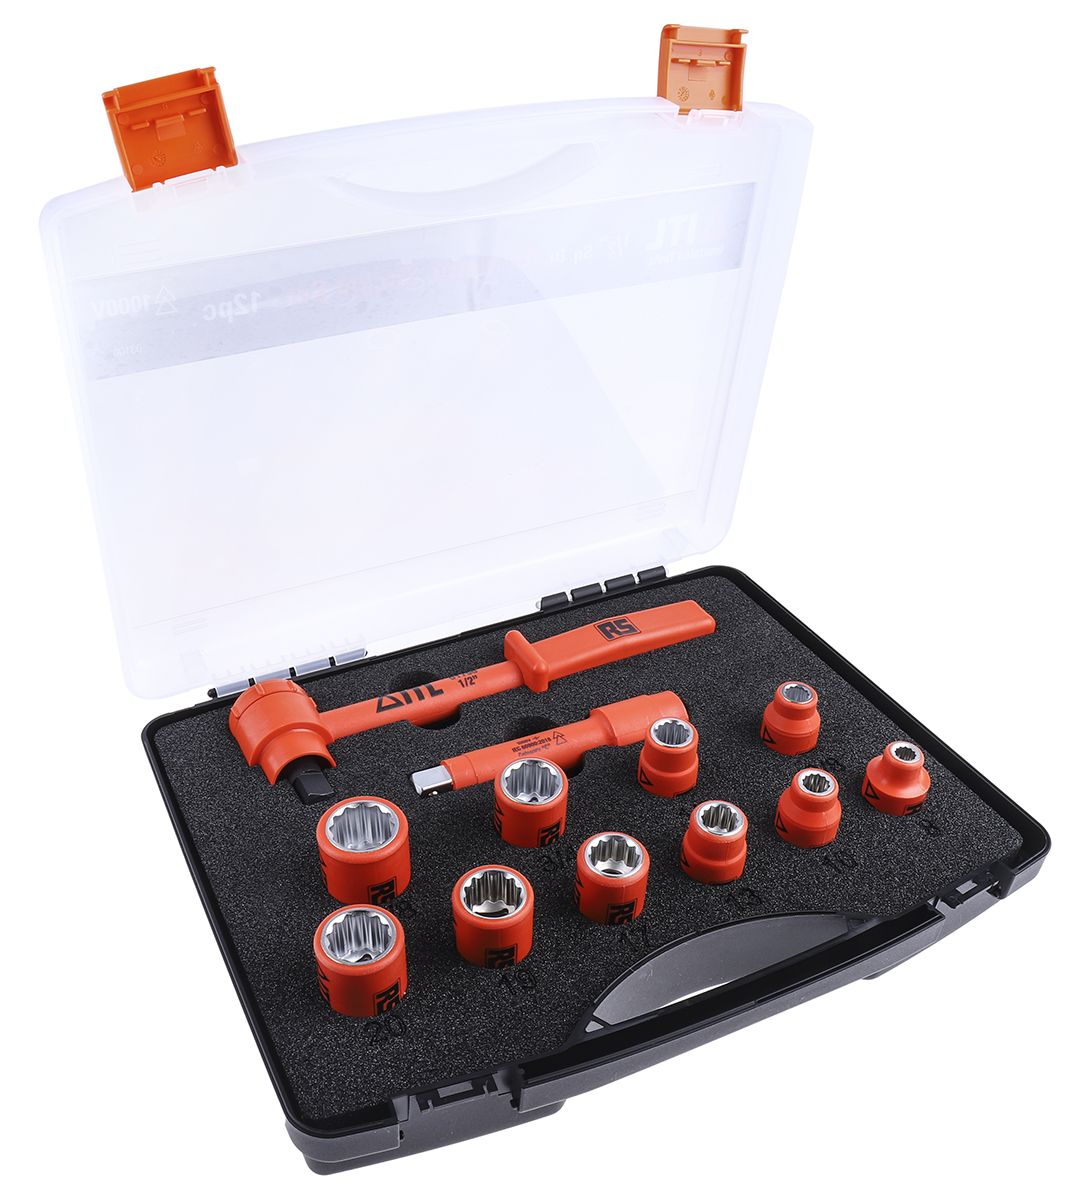 ITL Insulated Tools Ltd 12 Piece , 1/2 in Insulated Socket Set